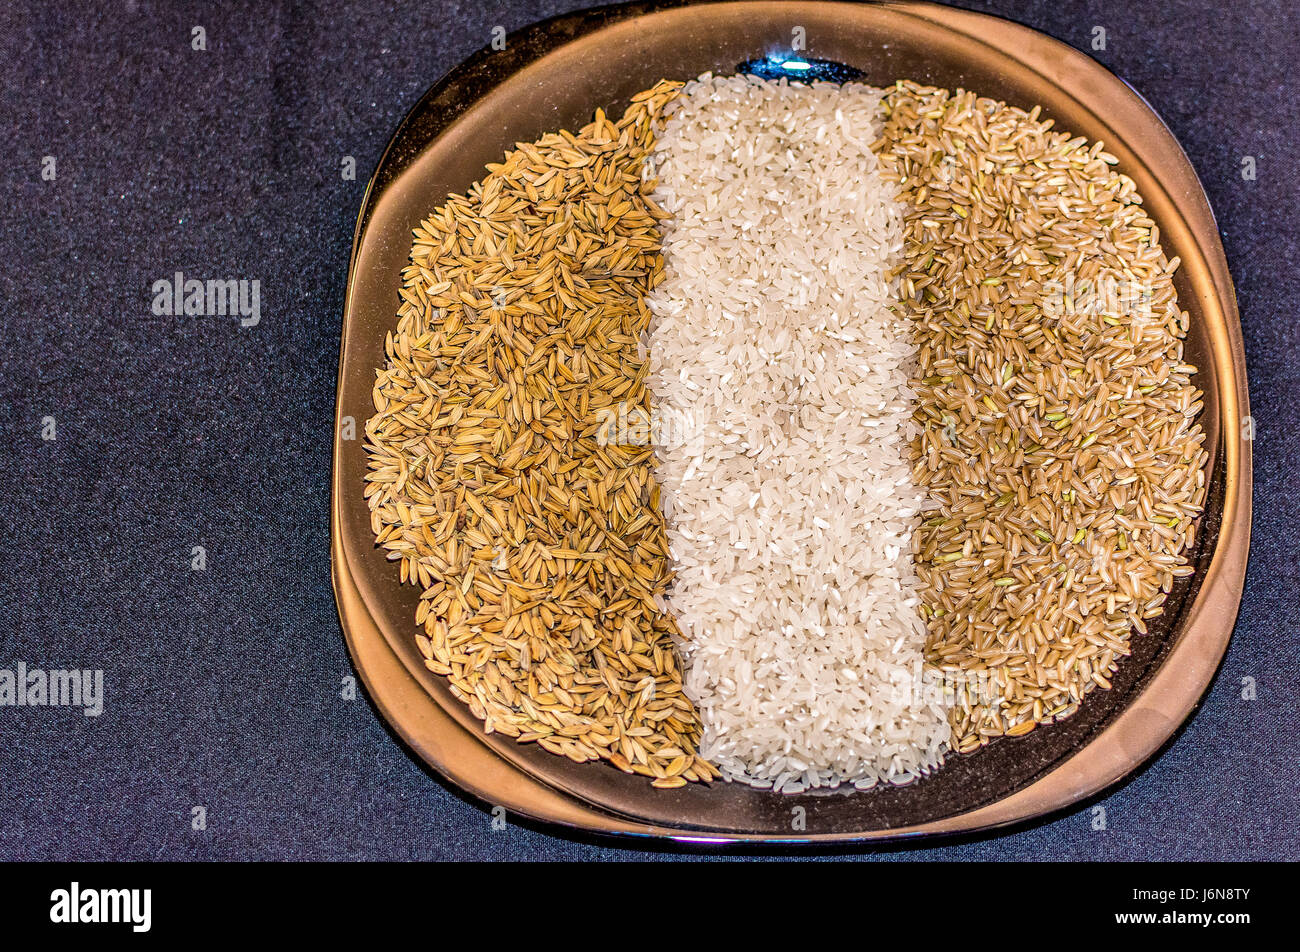 Bowl filled with rice variety Stock Photo